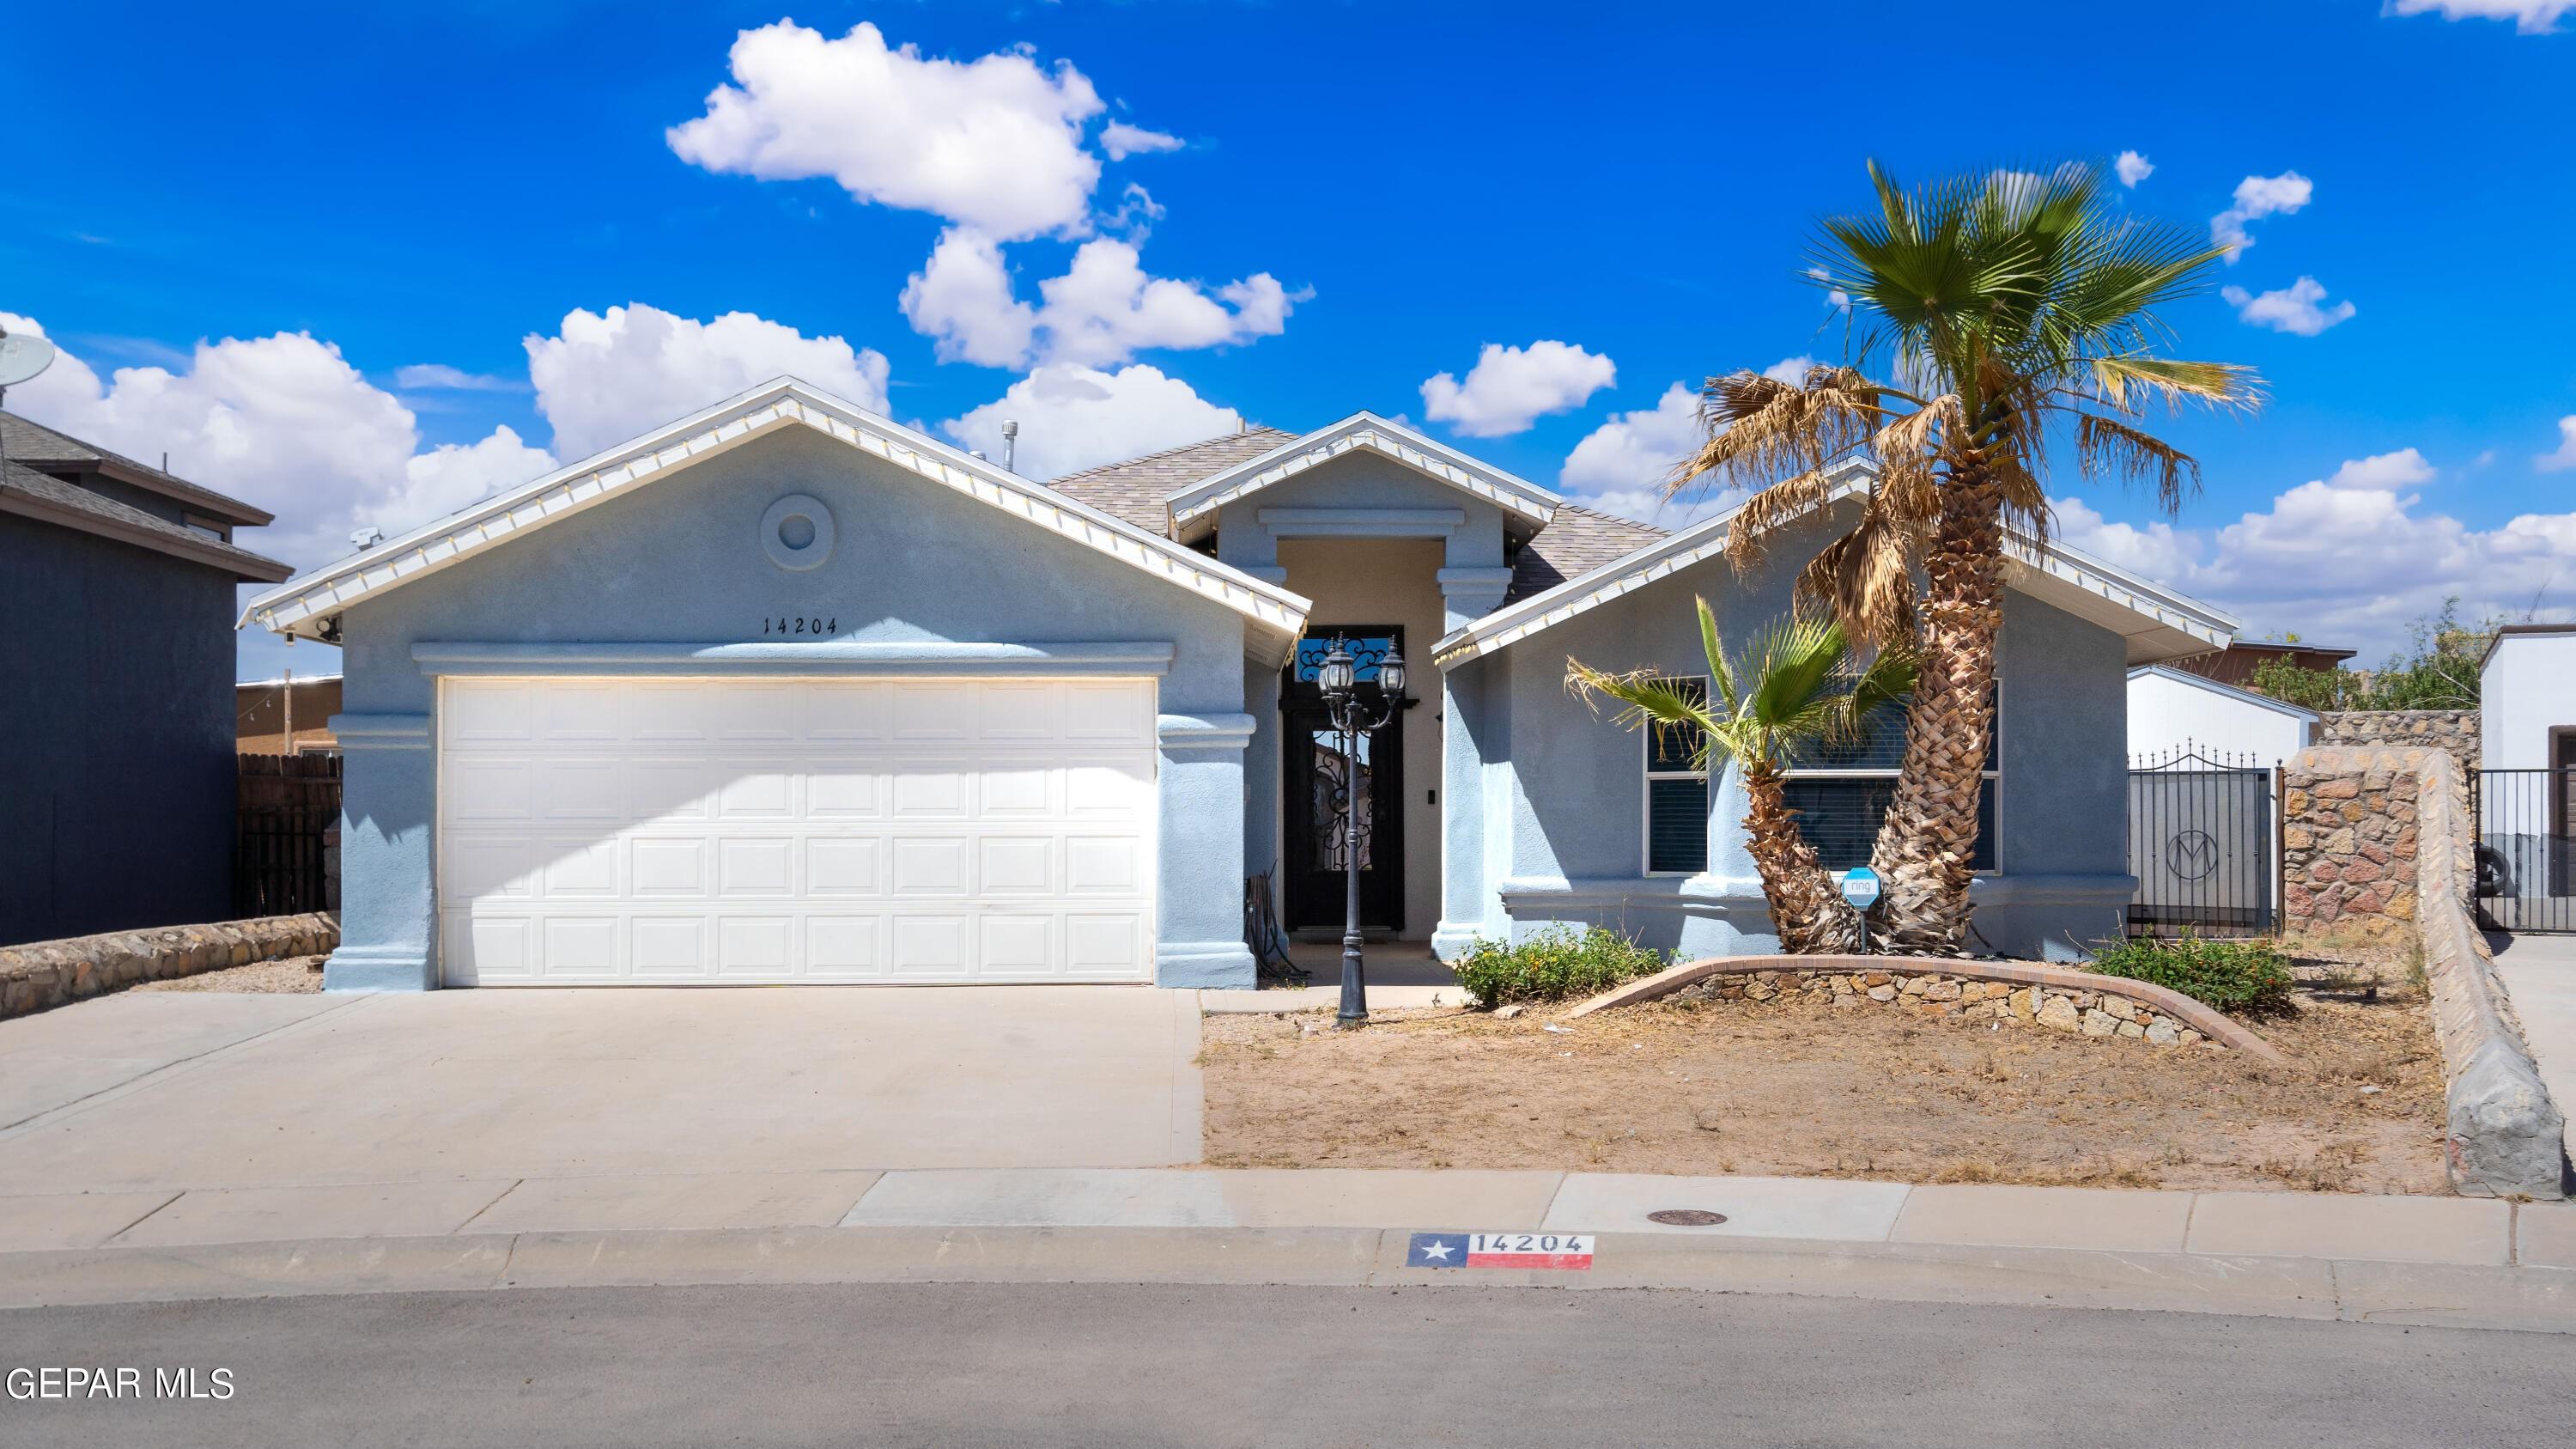 Property Image for 14204 Desert Yucca Drive